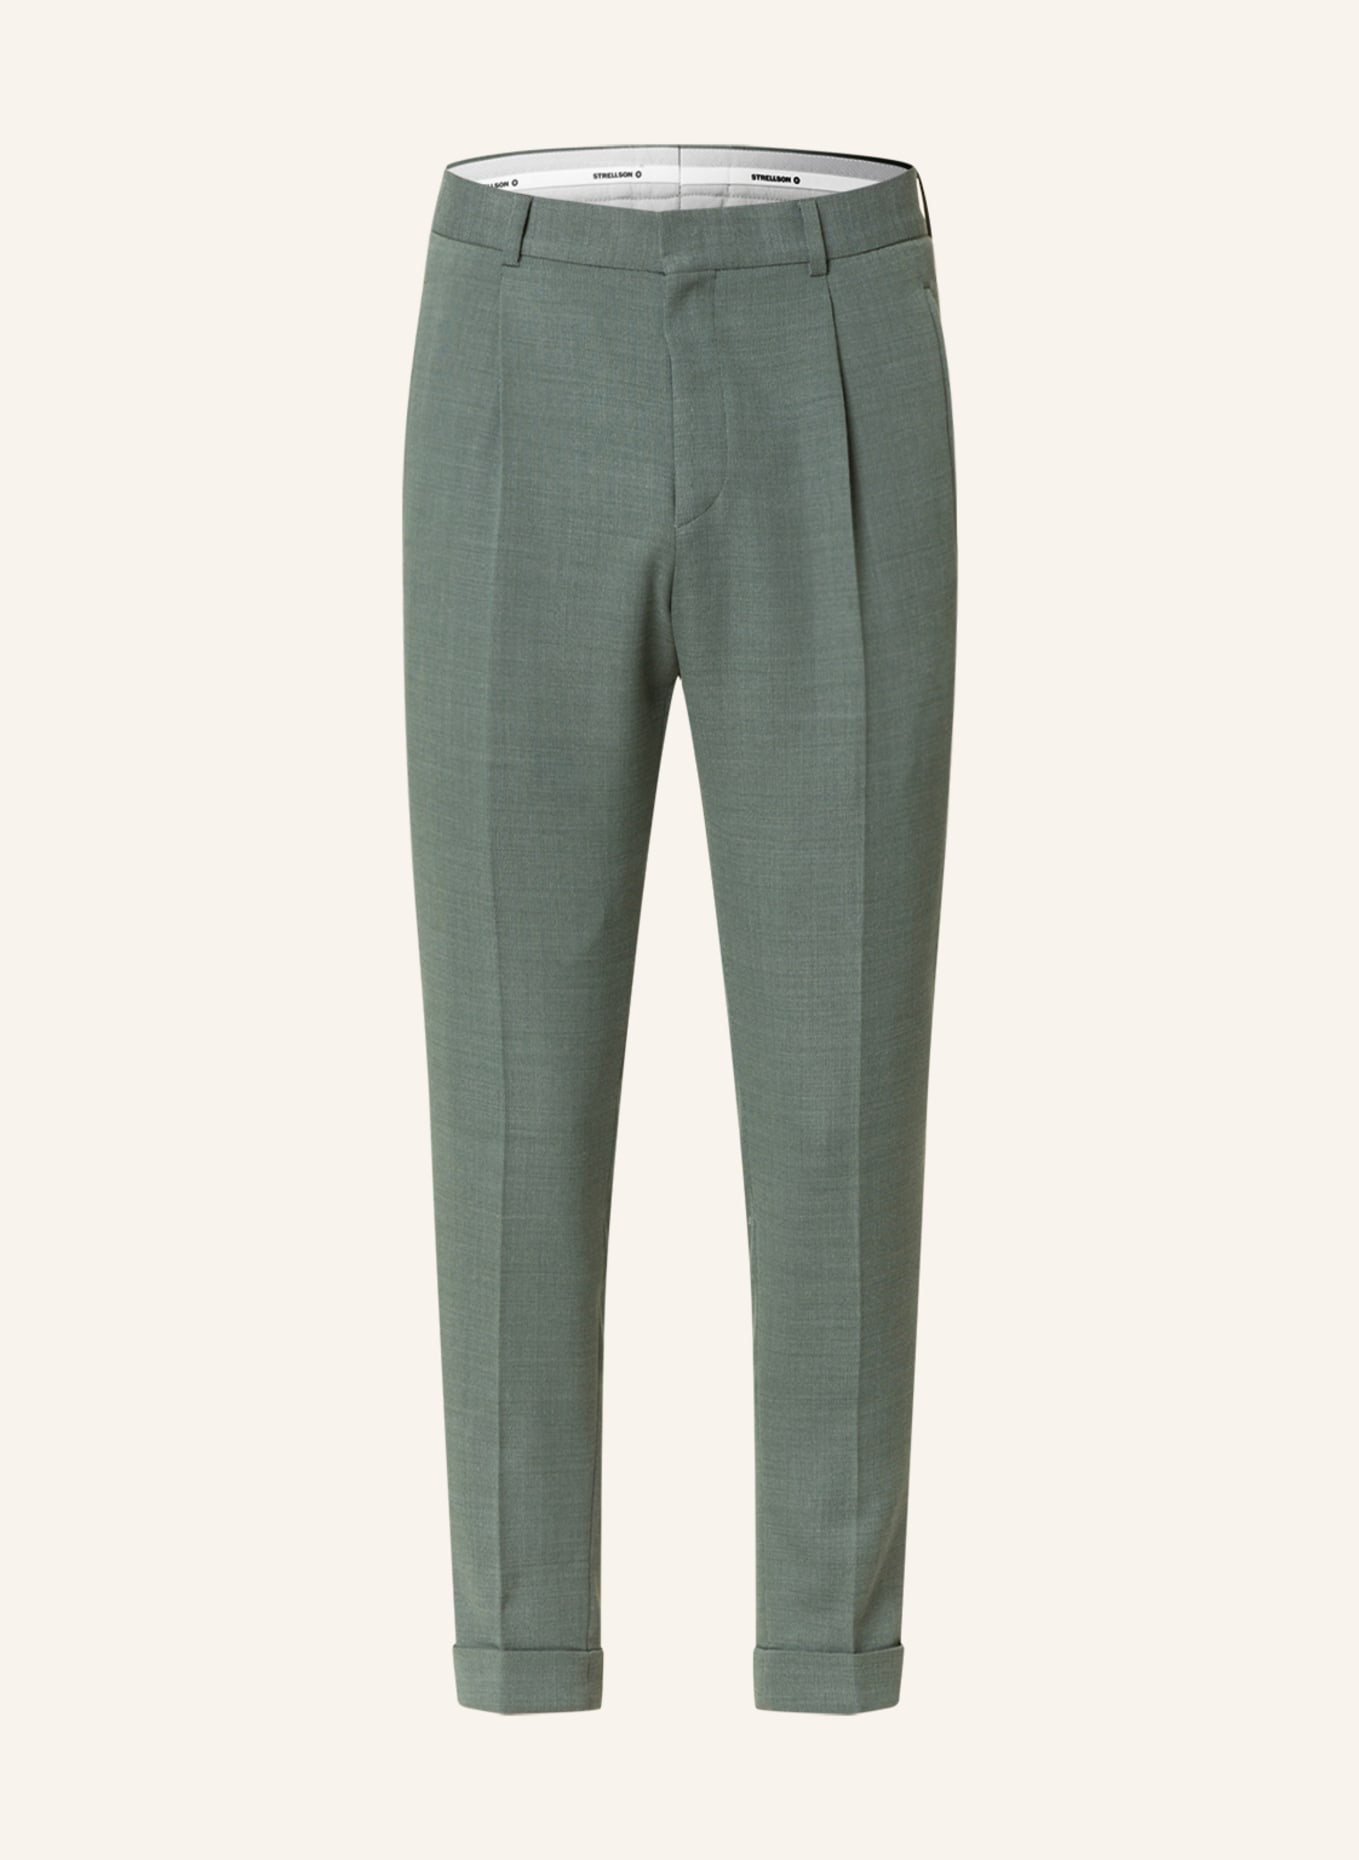 STRELLSON Suit pants LUIS relaxed fit, Color: 310 Medium Green               310 (Image 1)